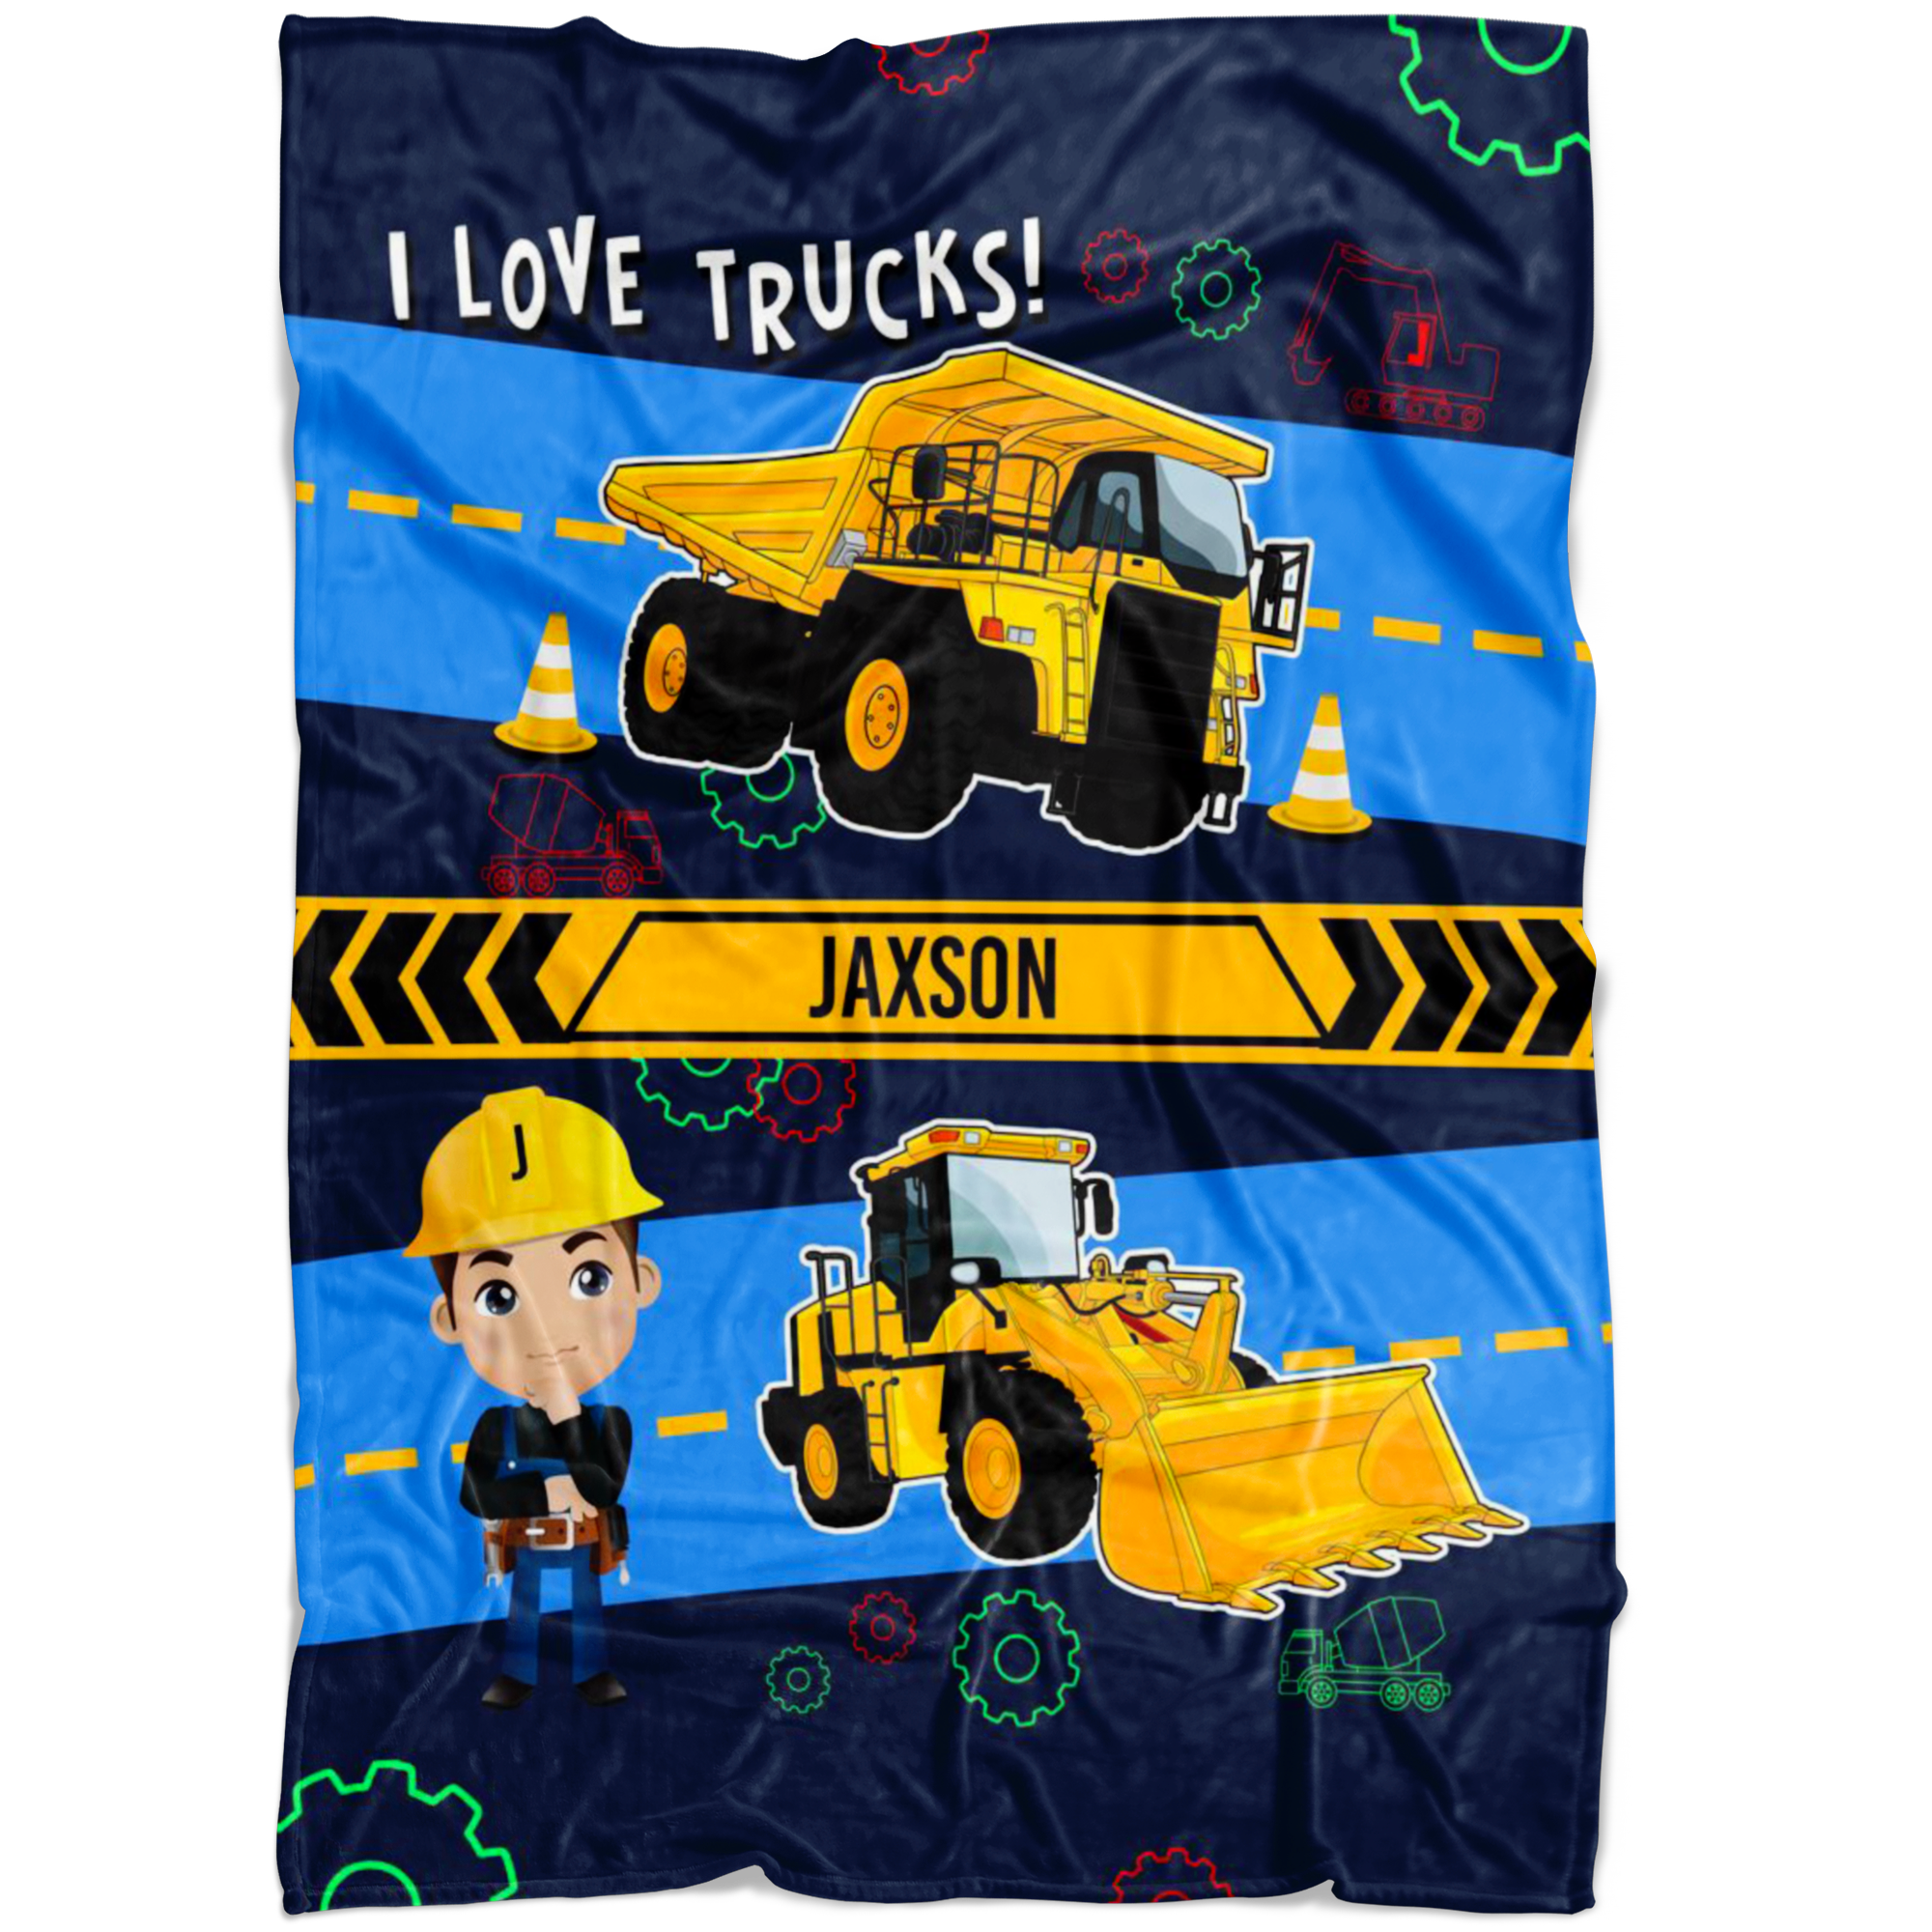 Personalized Name I Love Trucks Blanket for Boys & Girls with Character Personalization - Jaxson- Jaxc